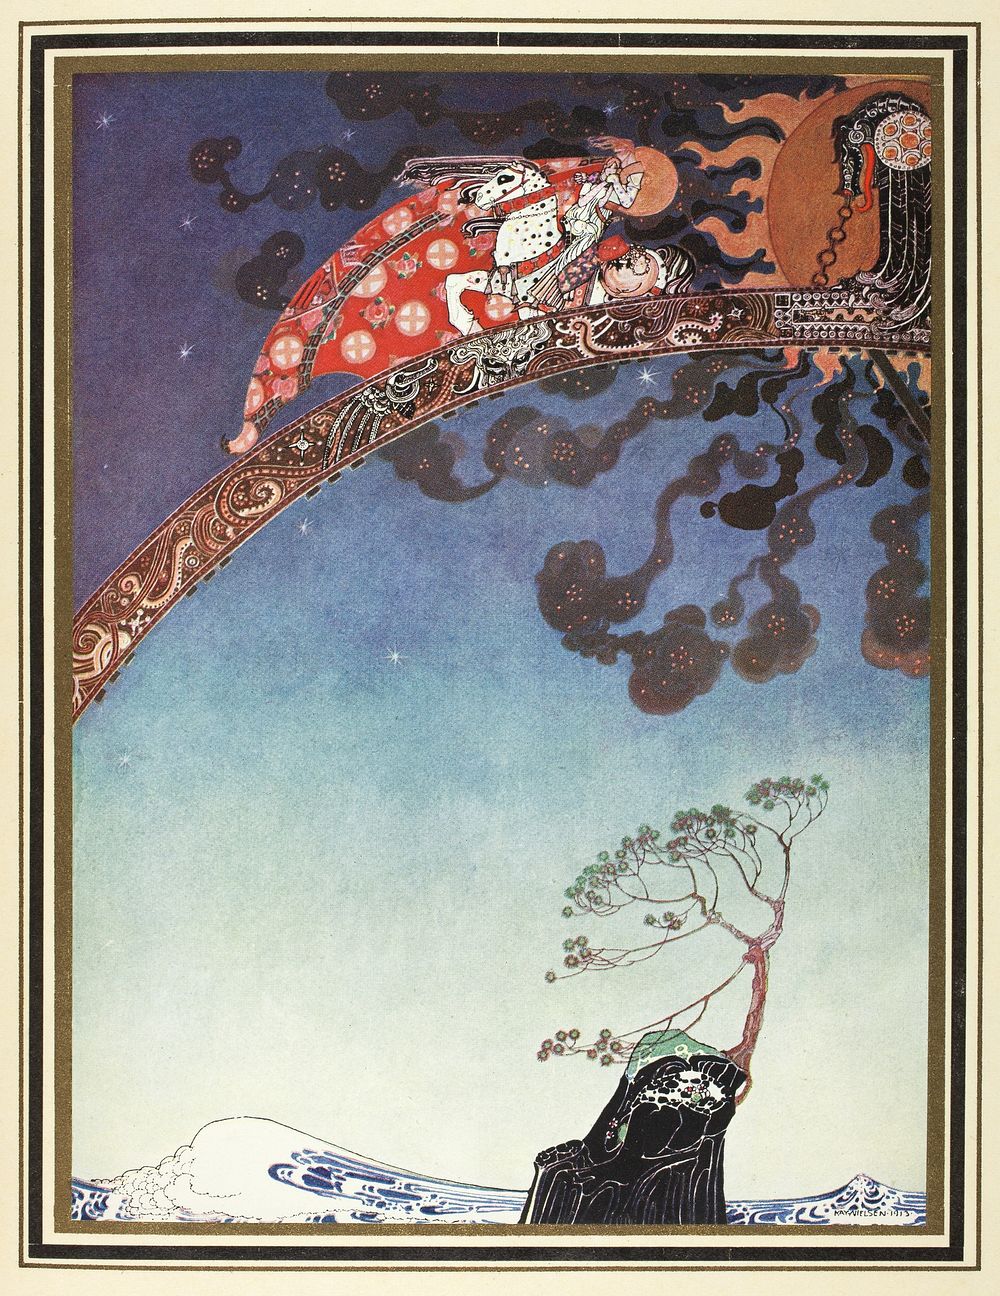 Illustration by Kay Nielsen in East of the sun and west of the moon (1914), (198 x 150 mm), Alexander Turnbull Library, qRPr…